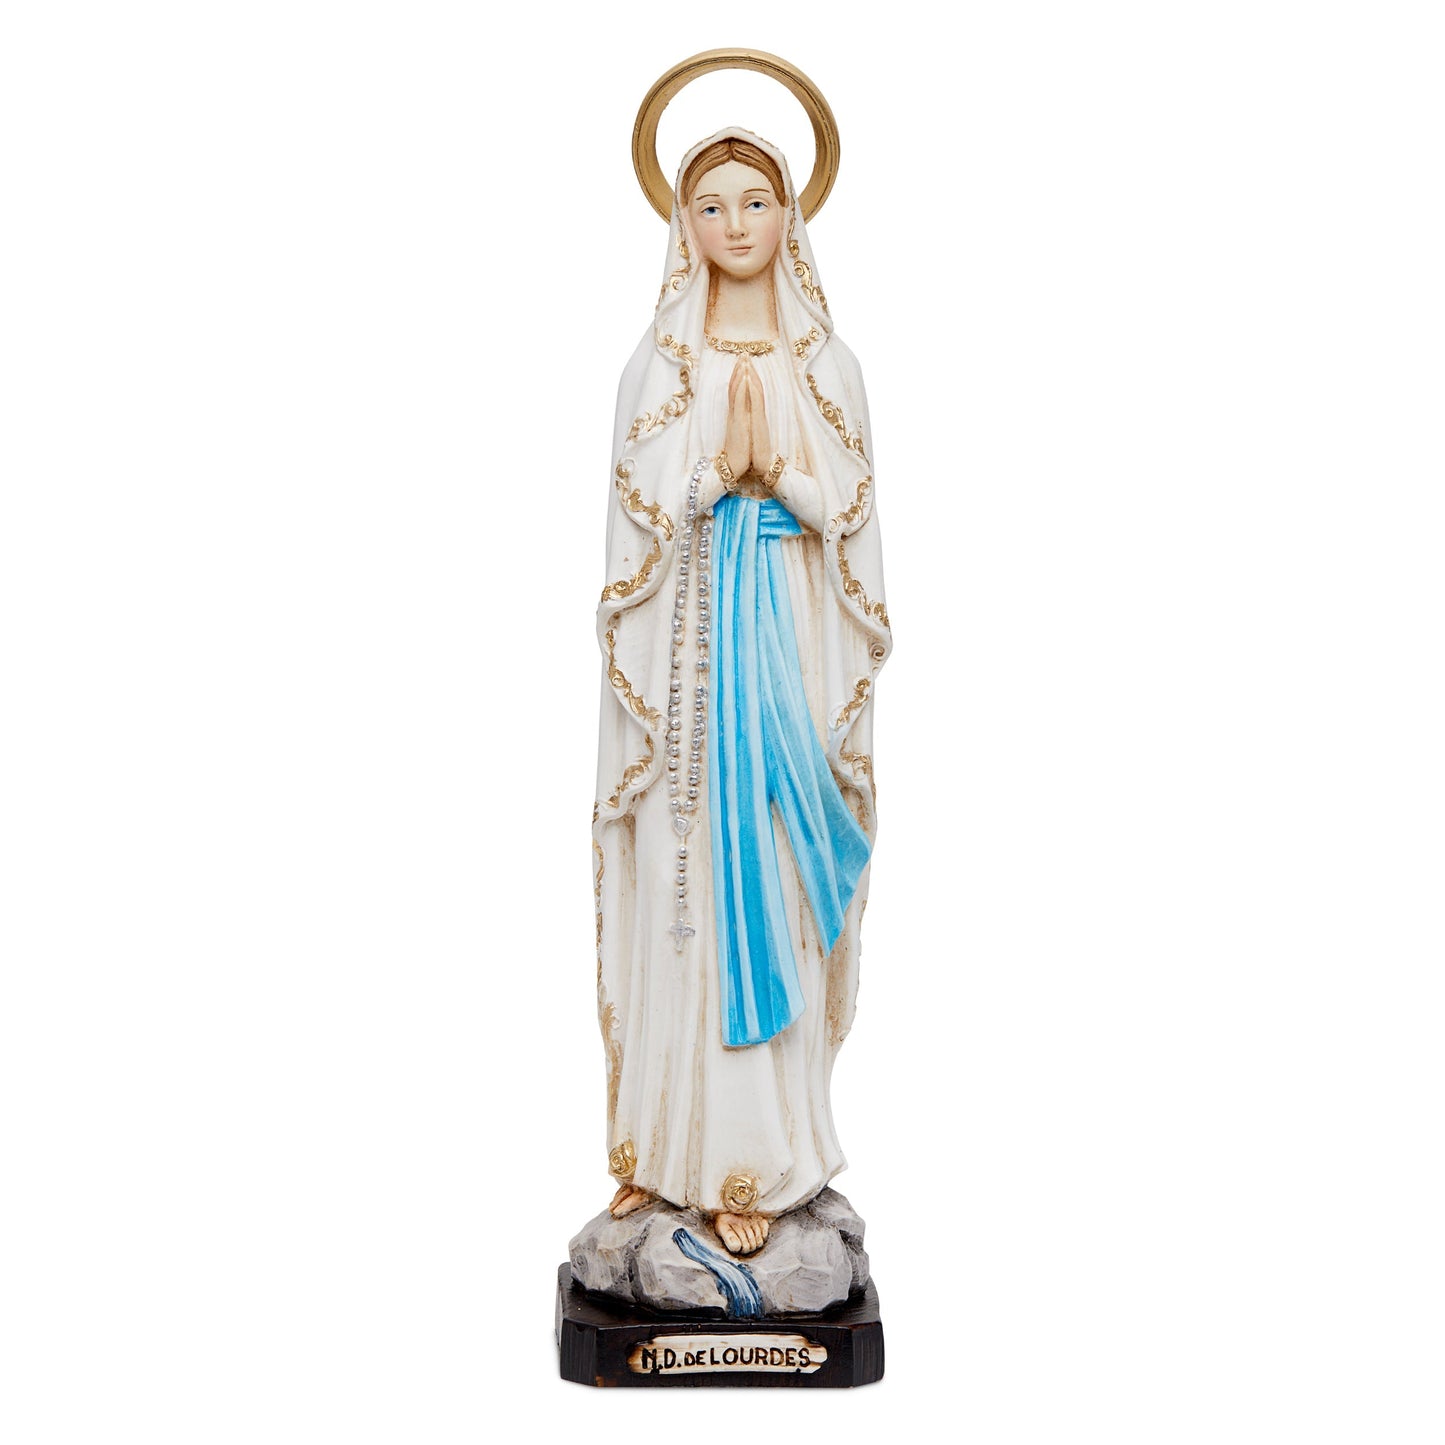 Mondo Cattolico 30 cm (11.81 in) Resin Statue of Our Lady of Lourdes With Halo